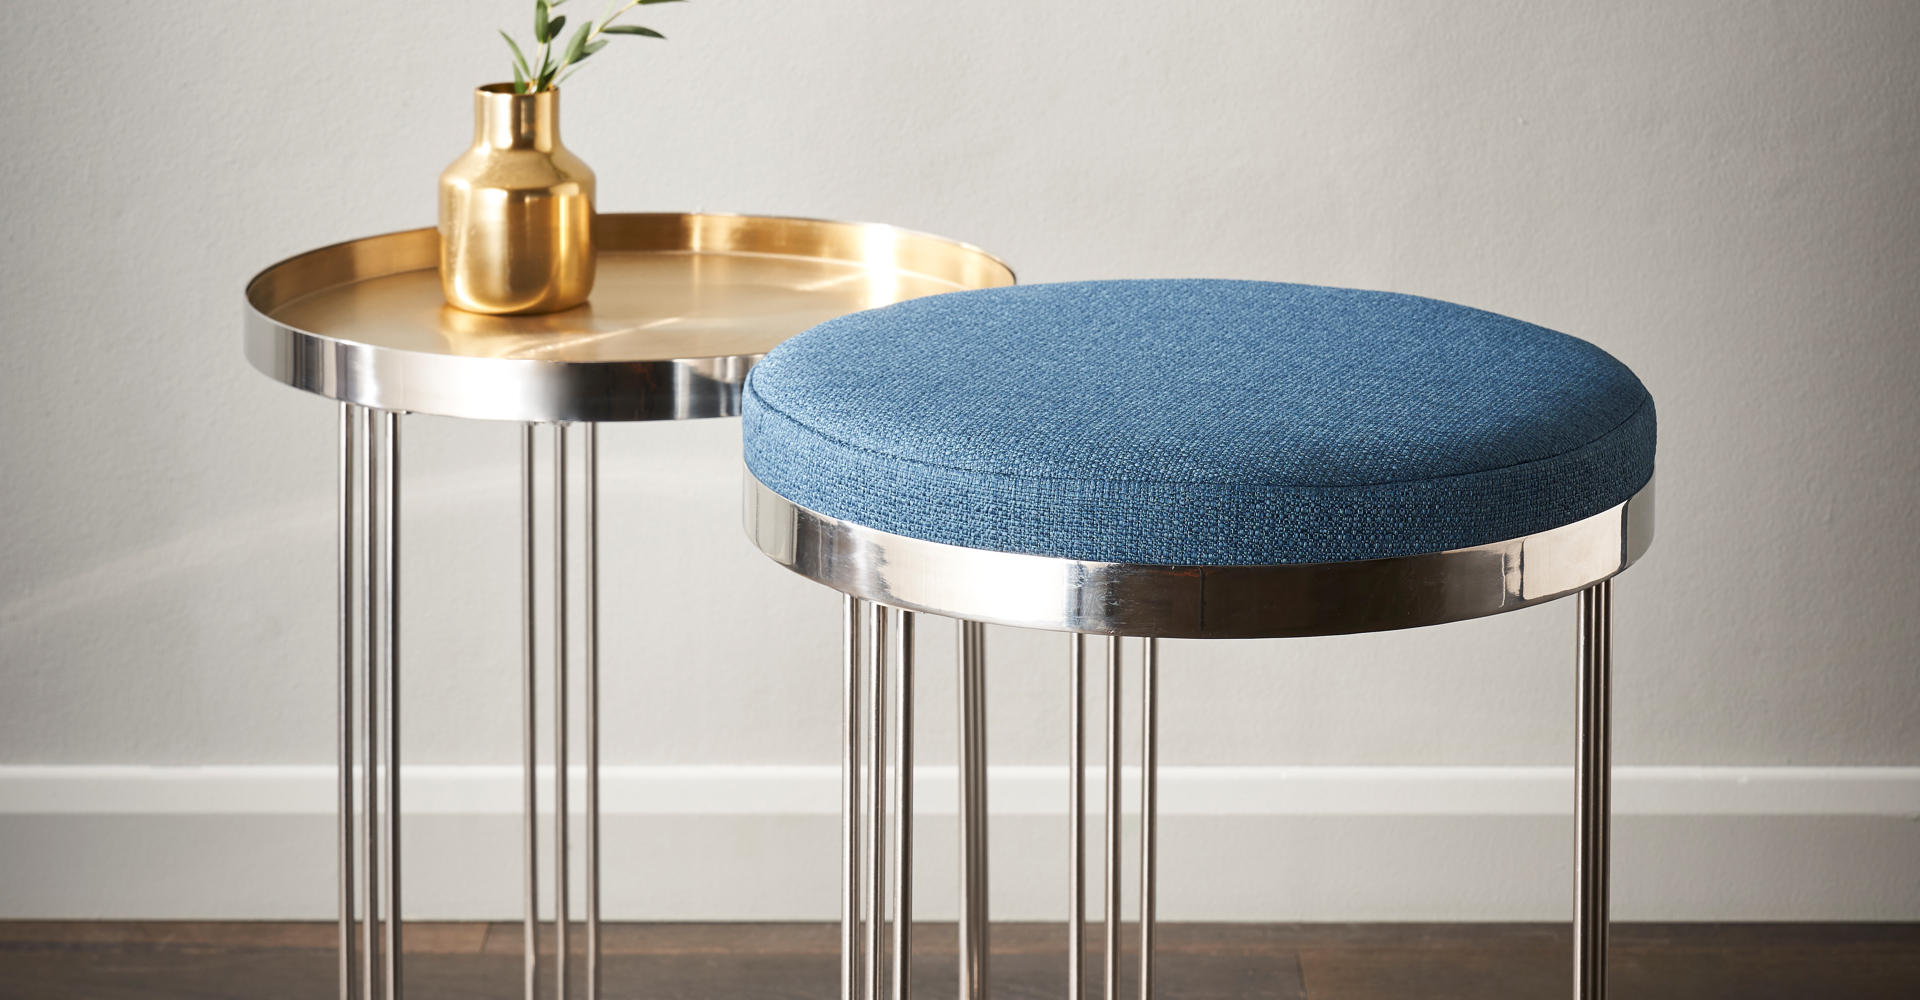 Finn Polished Chrome Side Tables With Brass Tray & Blue Upholstered Tops © GillmoreSPACE Ltd